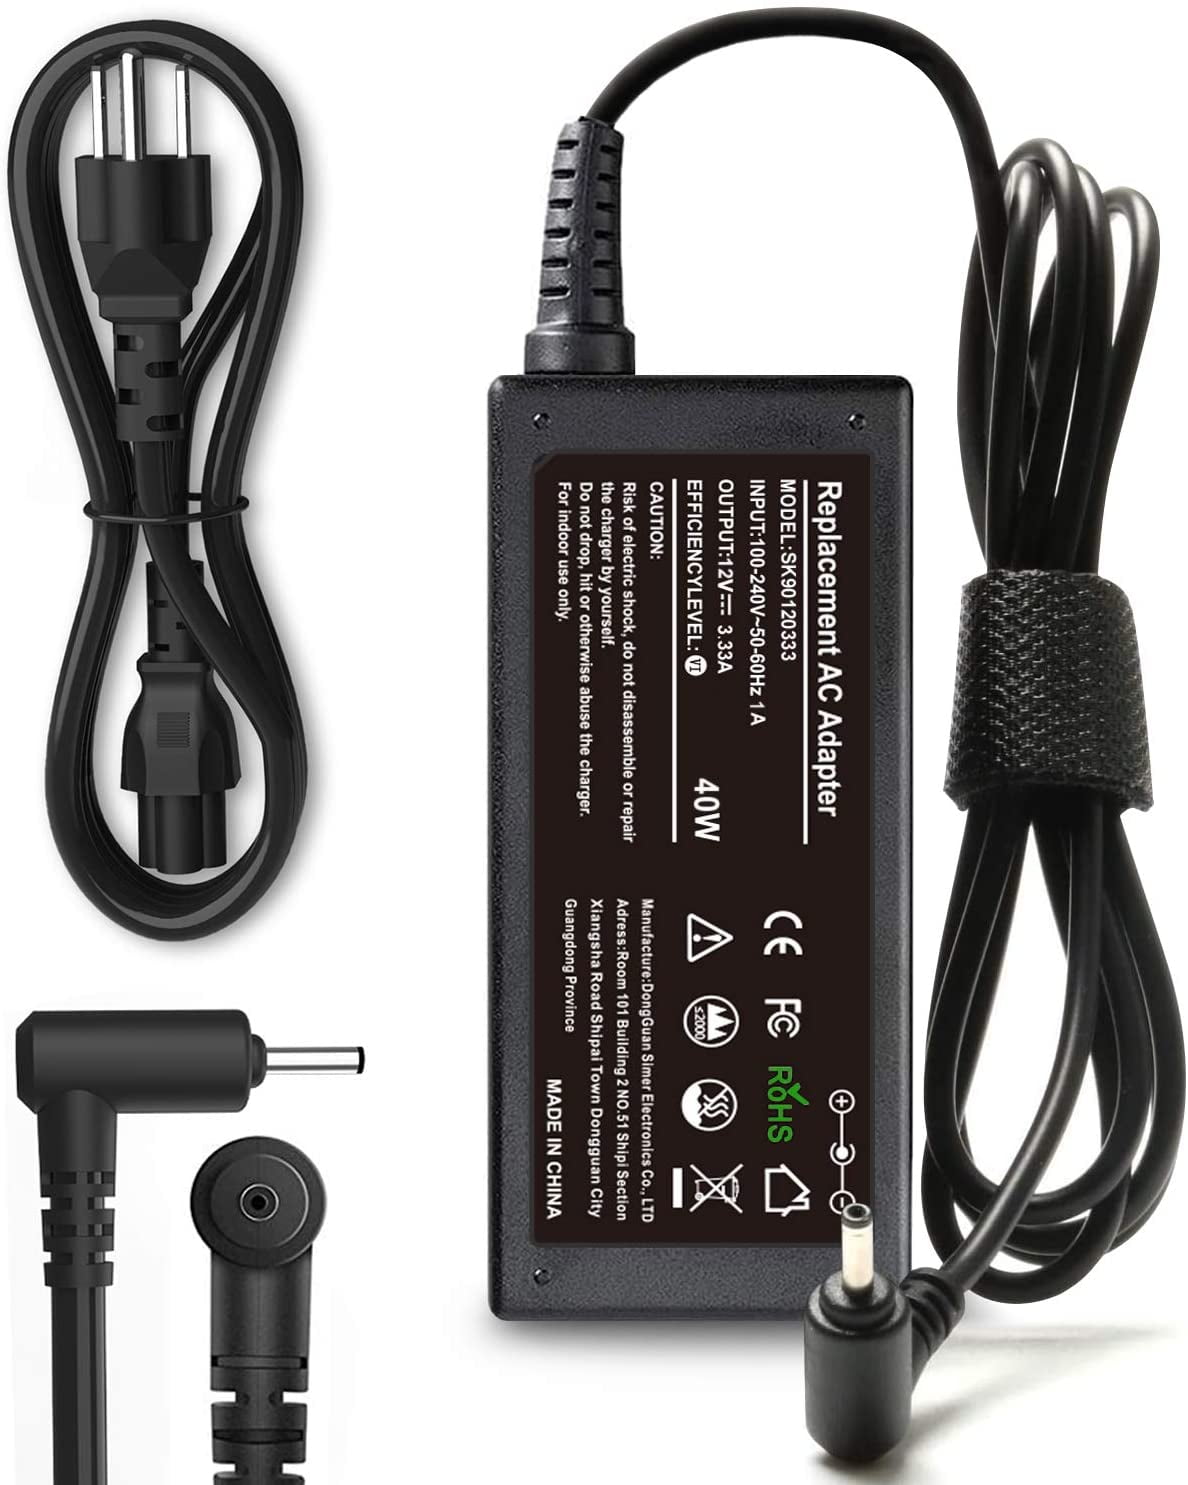 New AC Wall Power supply adapter for Chromebook Charger for model XE303C12-A01US